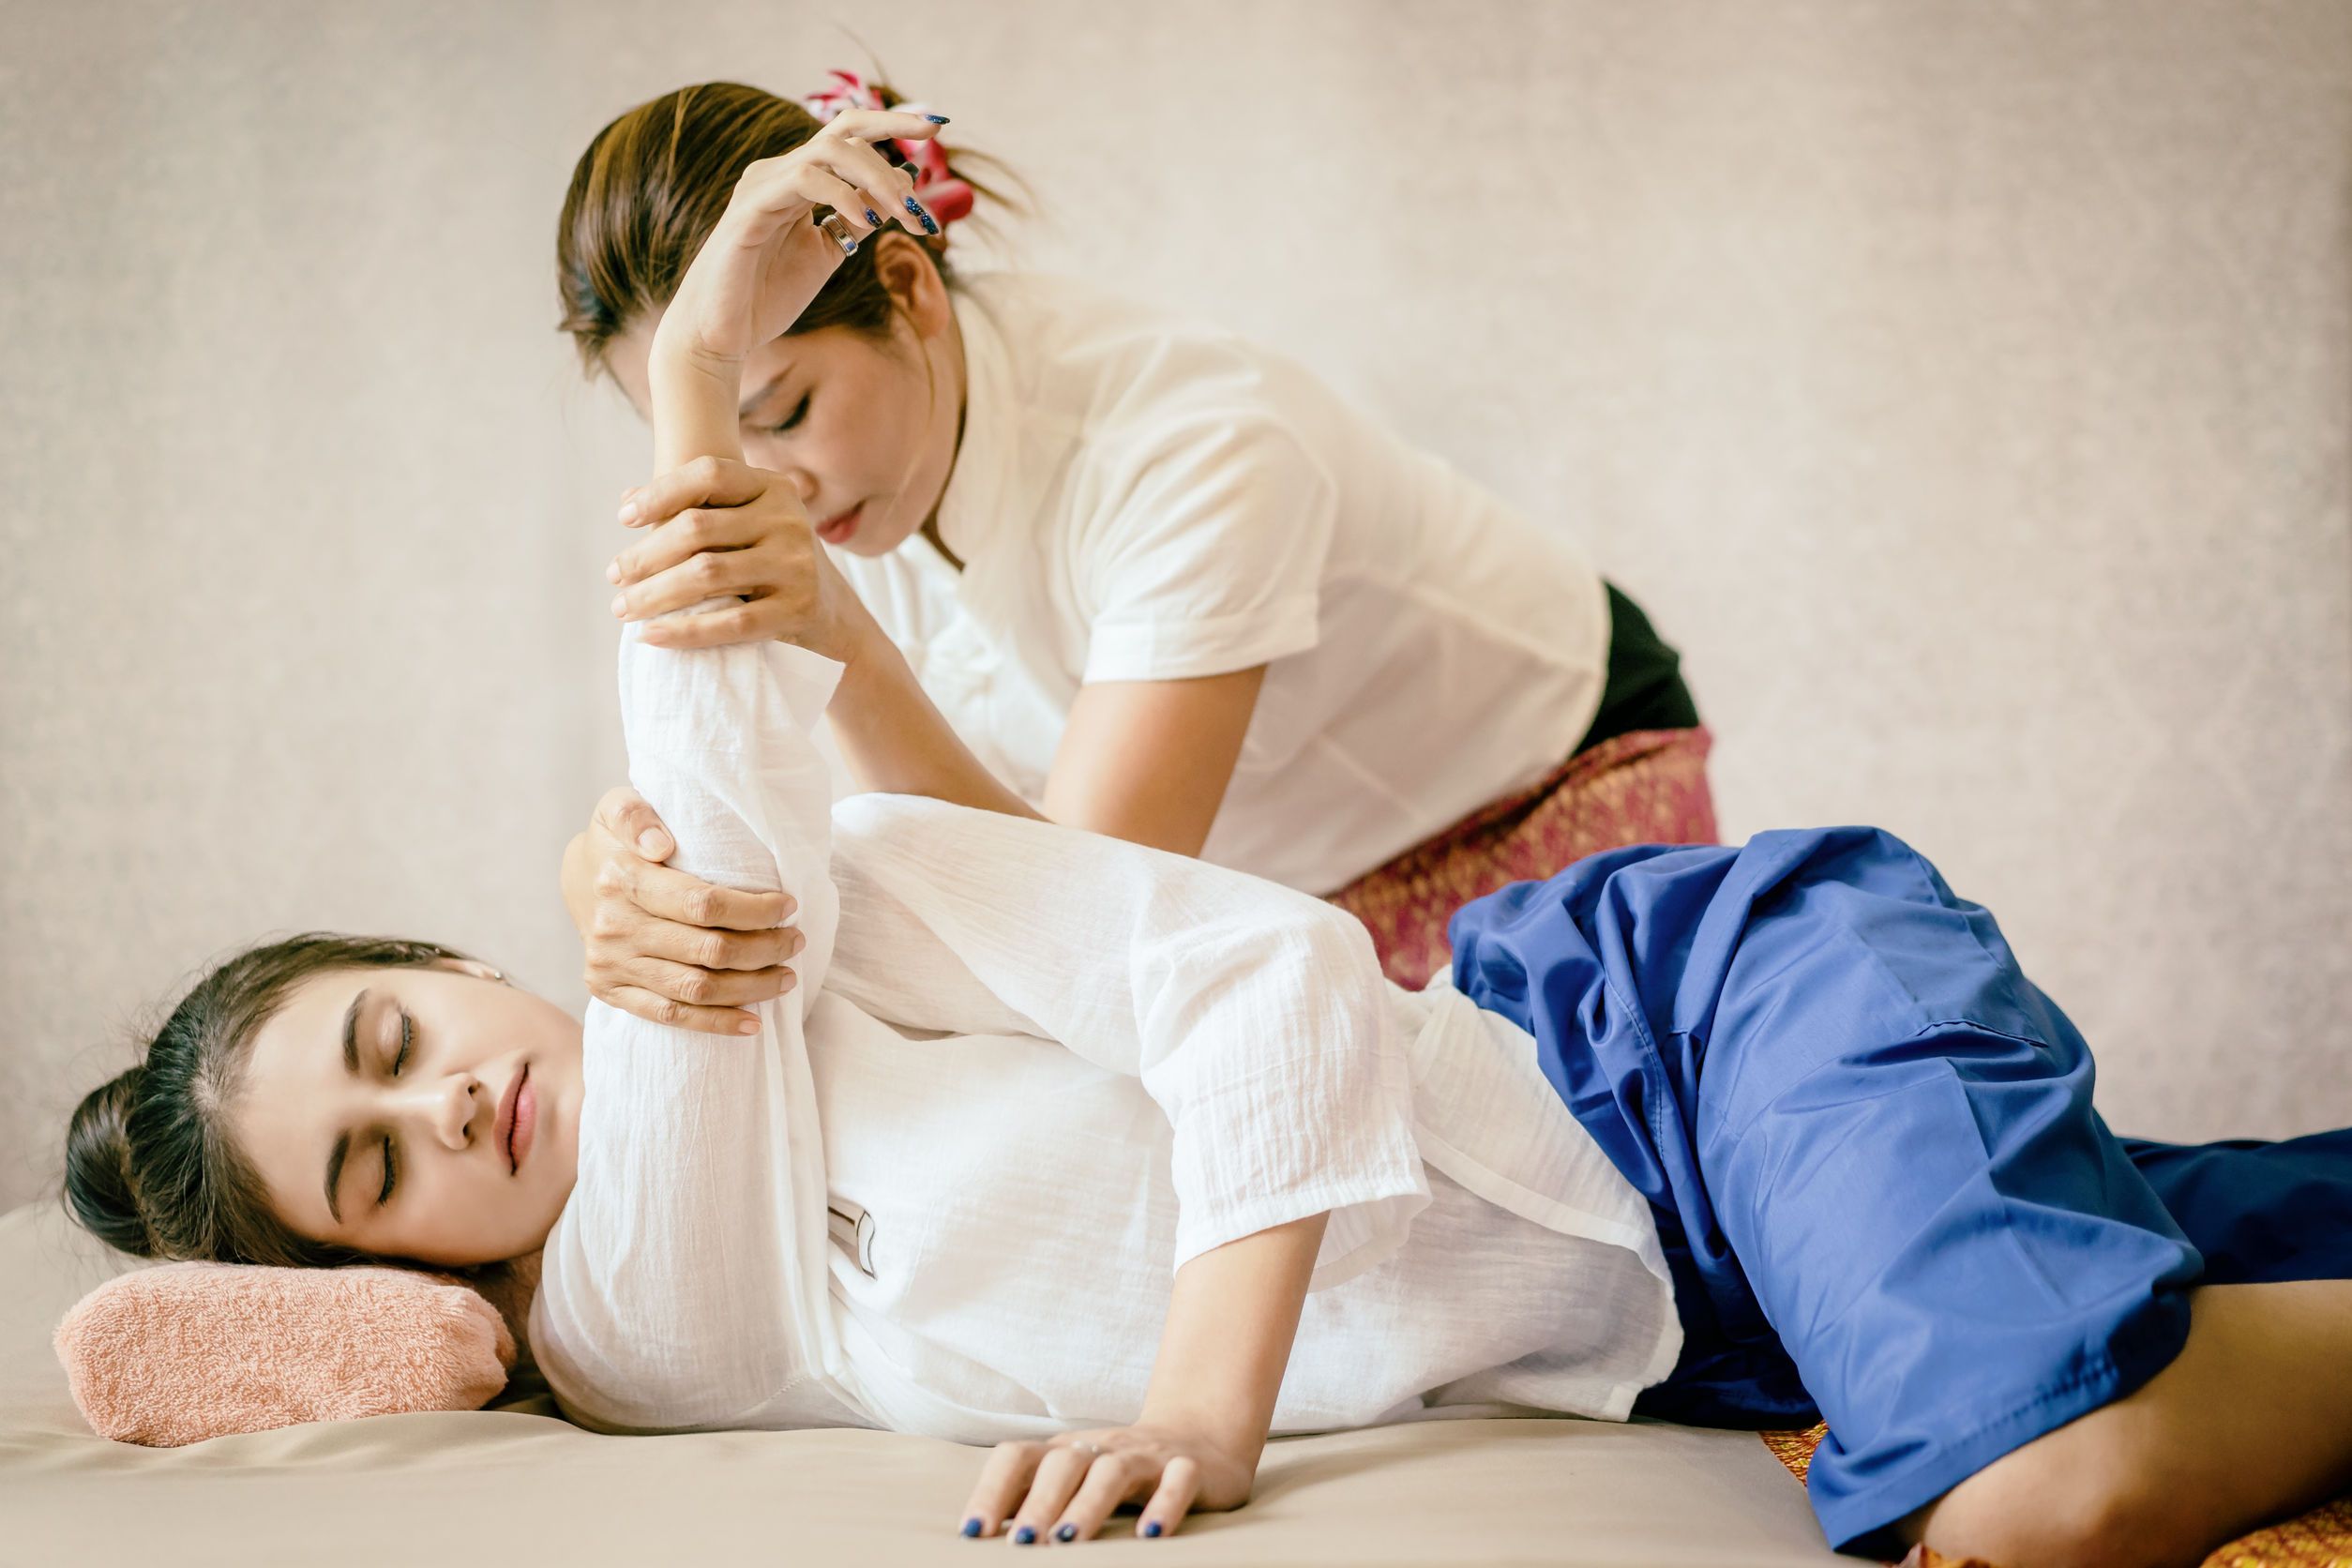 Thai Massage Vs Massage Therapy What To Know For Your Bodys Benefit Botanica Day Spa